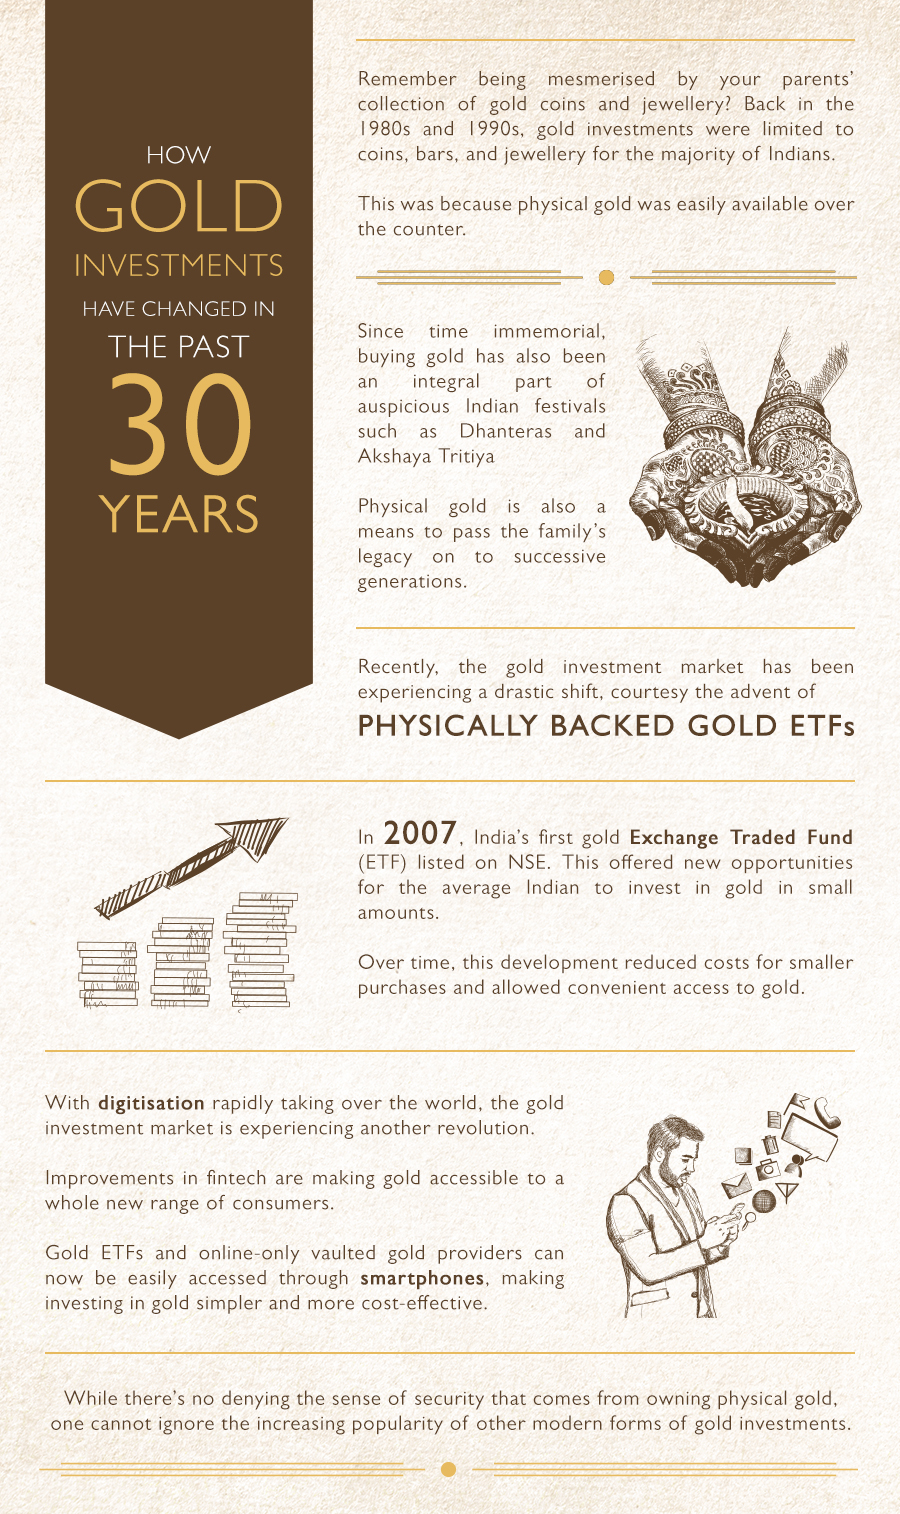 Gold as an investment - Consumer choices & shifts